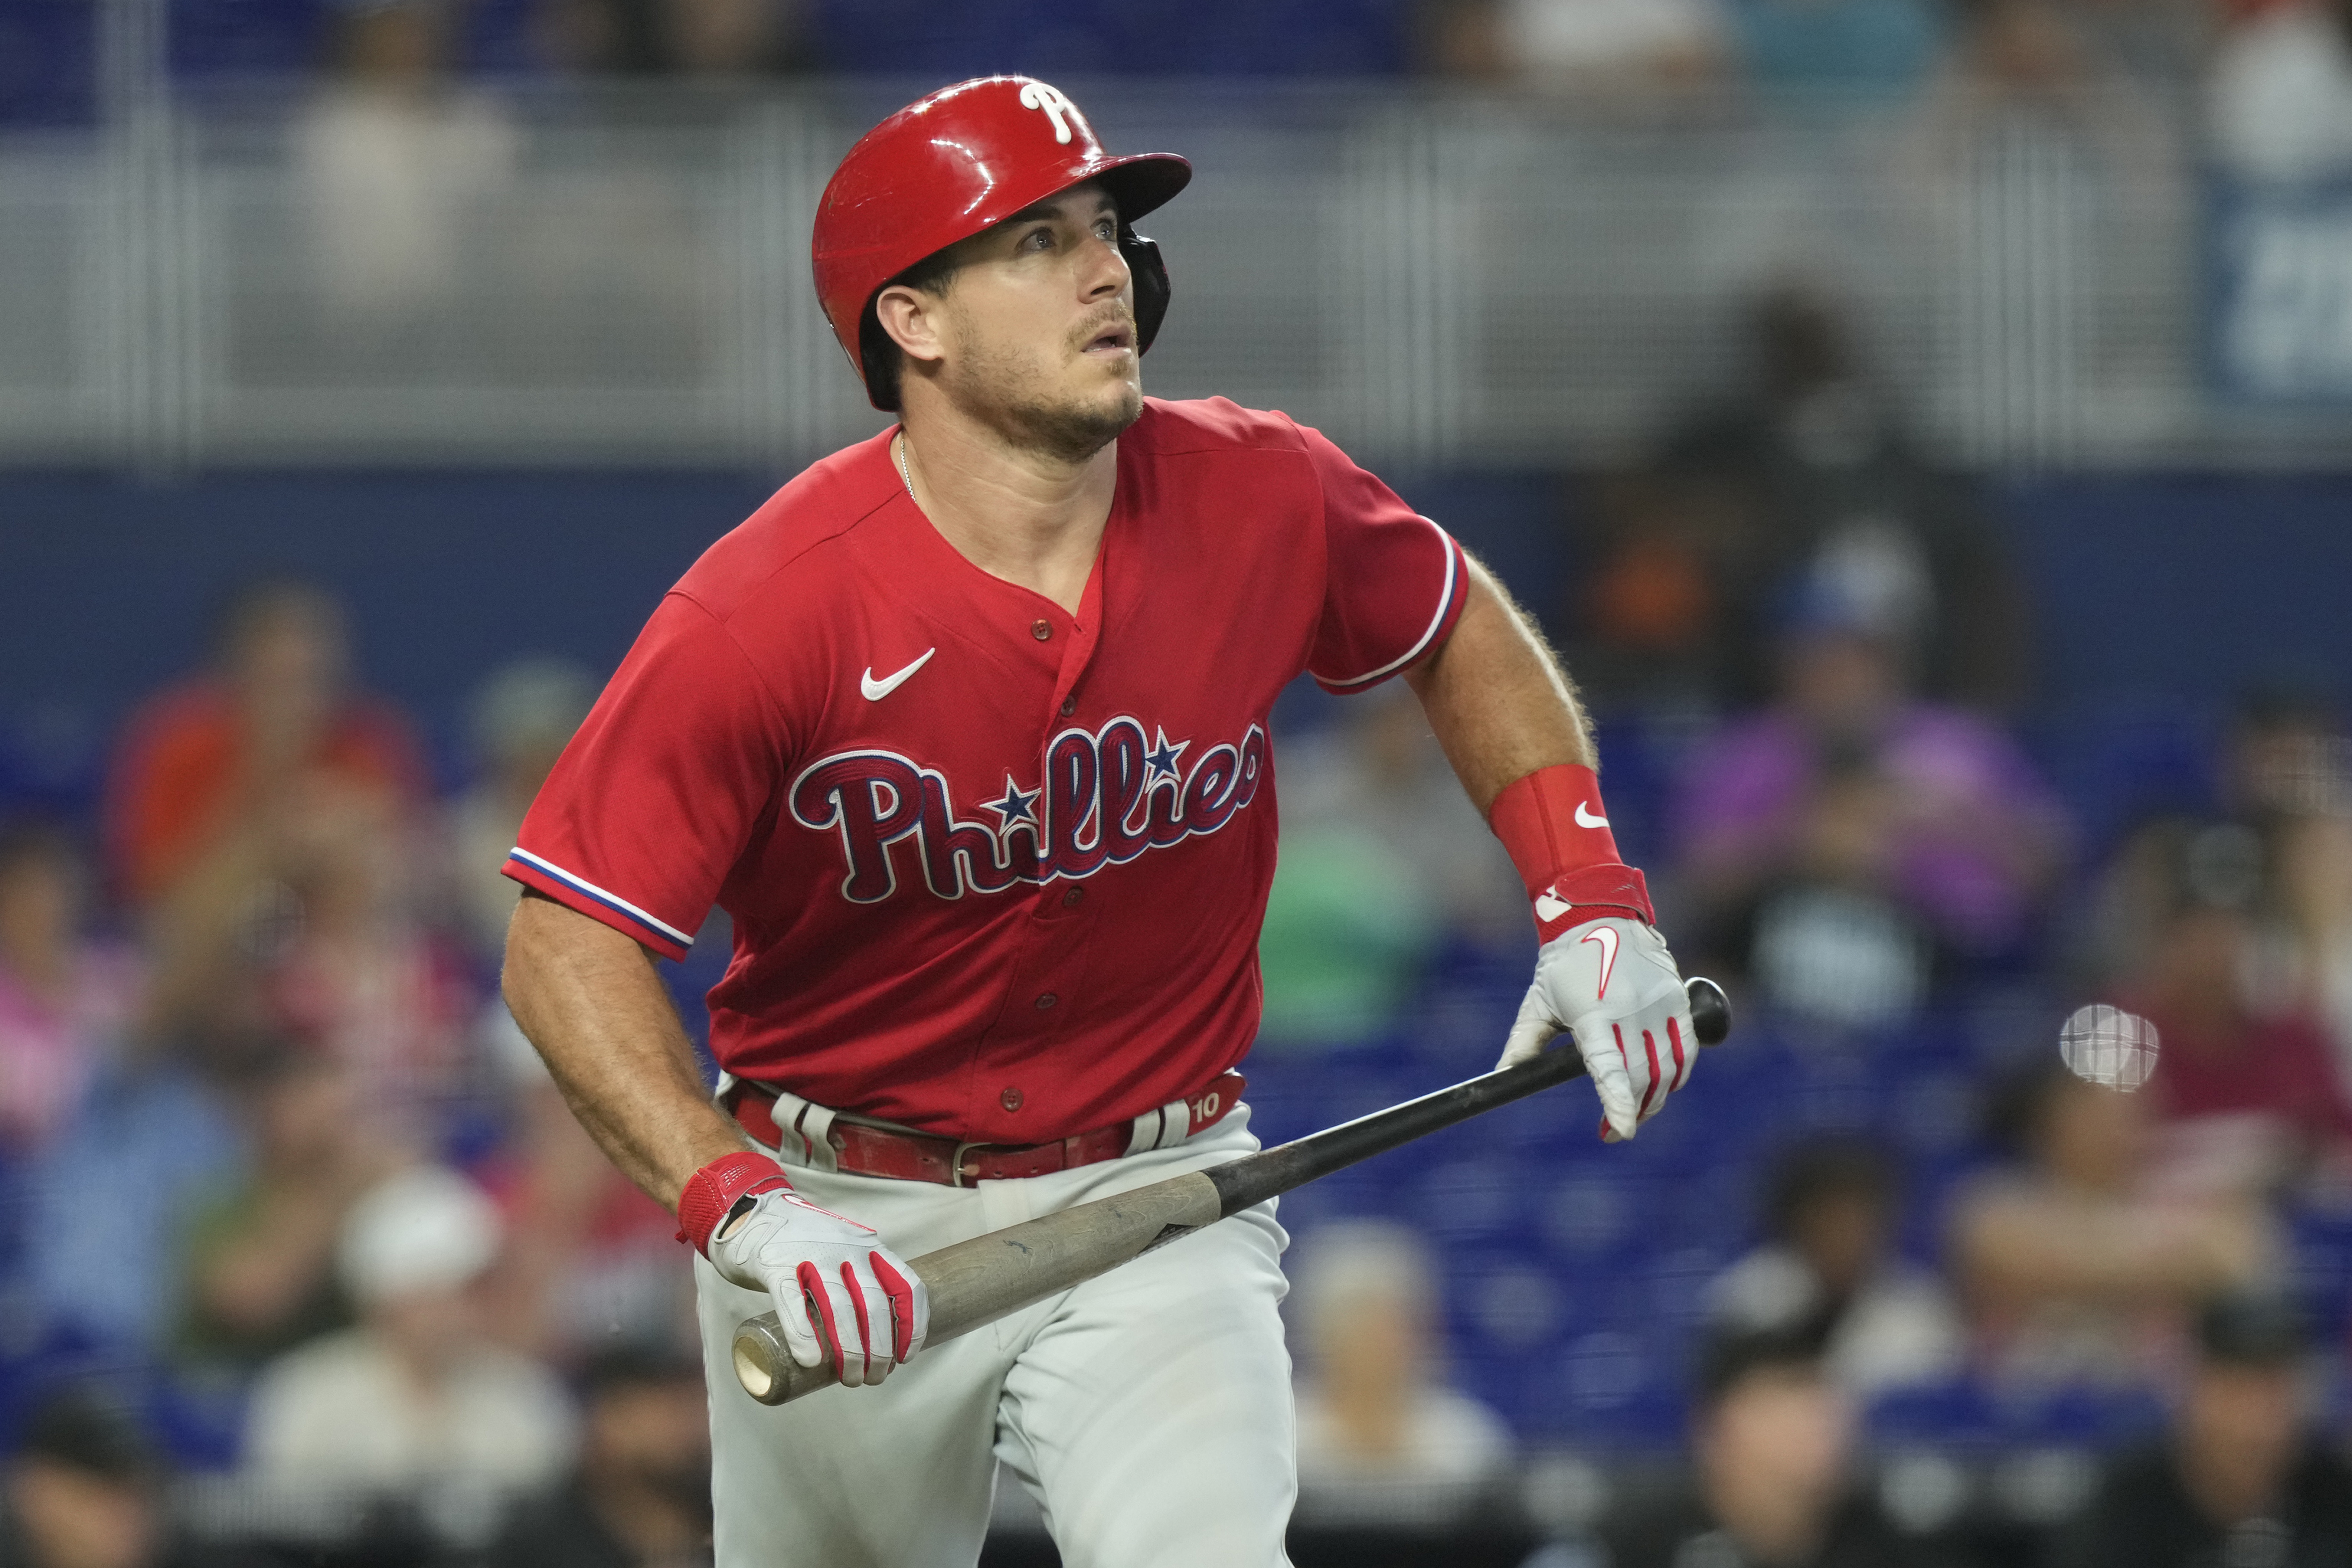 JT Realmuto's Profile & Career: All About JT Realmuto, Baseball's Next Top  Catcher: JT Realmuto